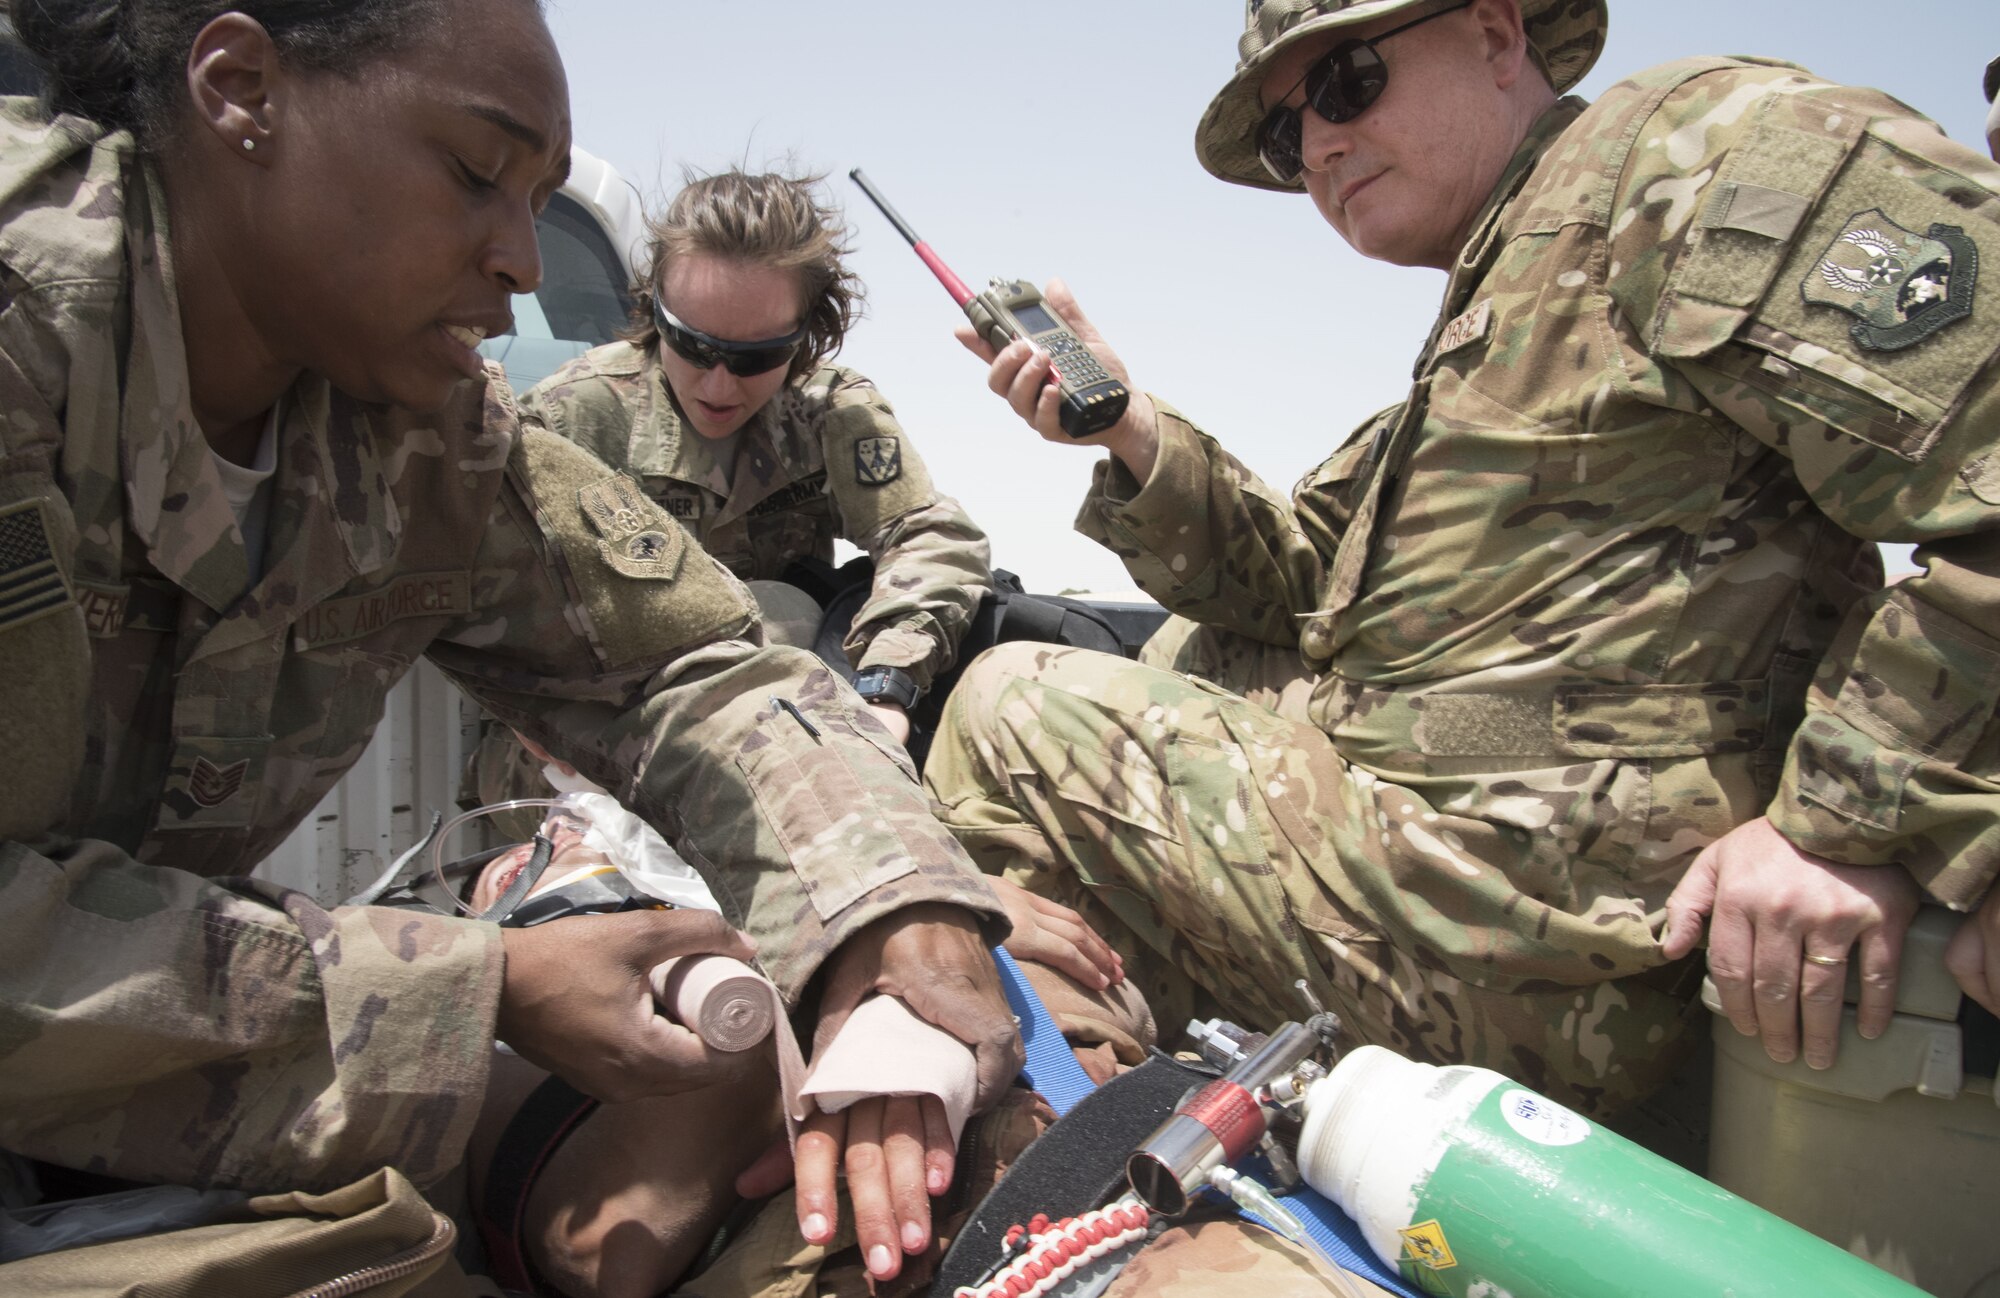 U.S. Air Force members from the 380th Expeditionary Medical Group simulates a dispatch call to the crisis action team while treating a role-playing injuried pilot during a joint agency exercise here, May 2. (U.S. Air National Guard photo by Staff Sgt. Erica Rodriguez)